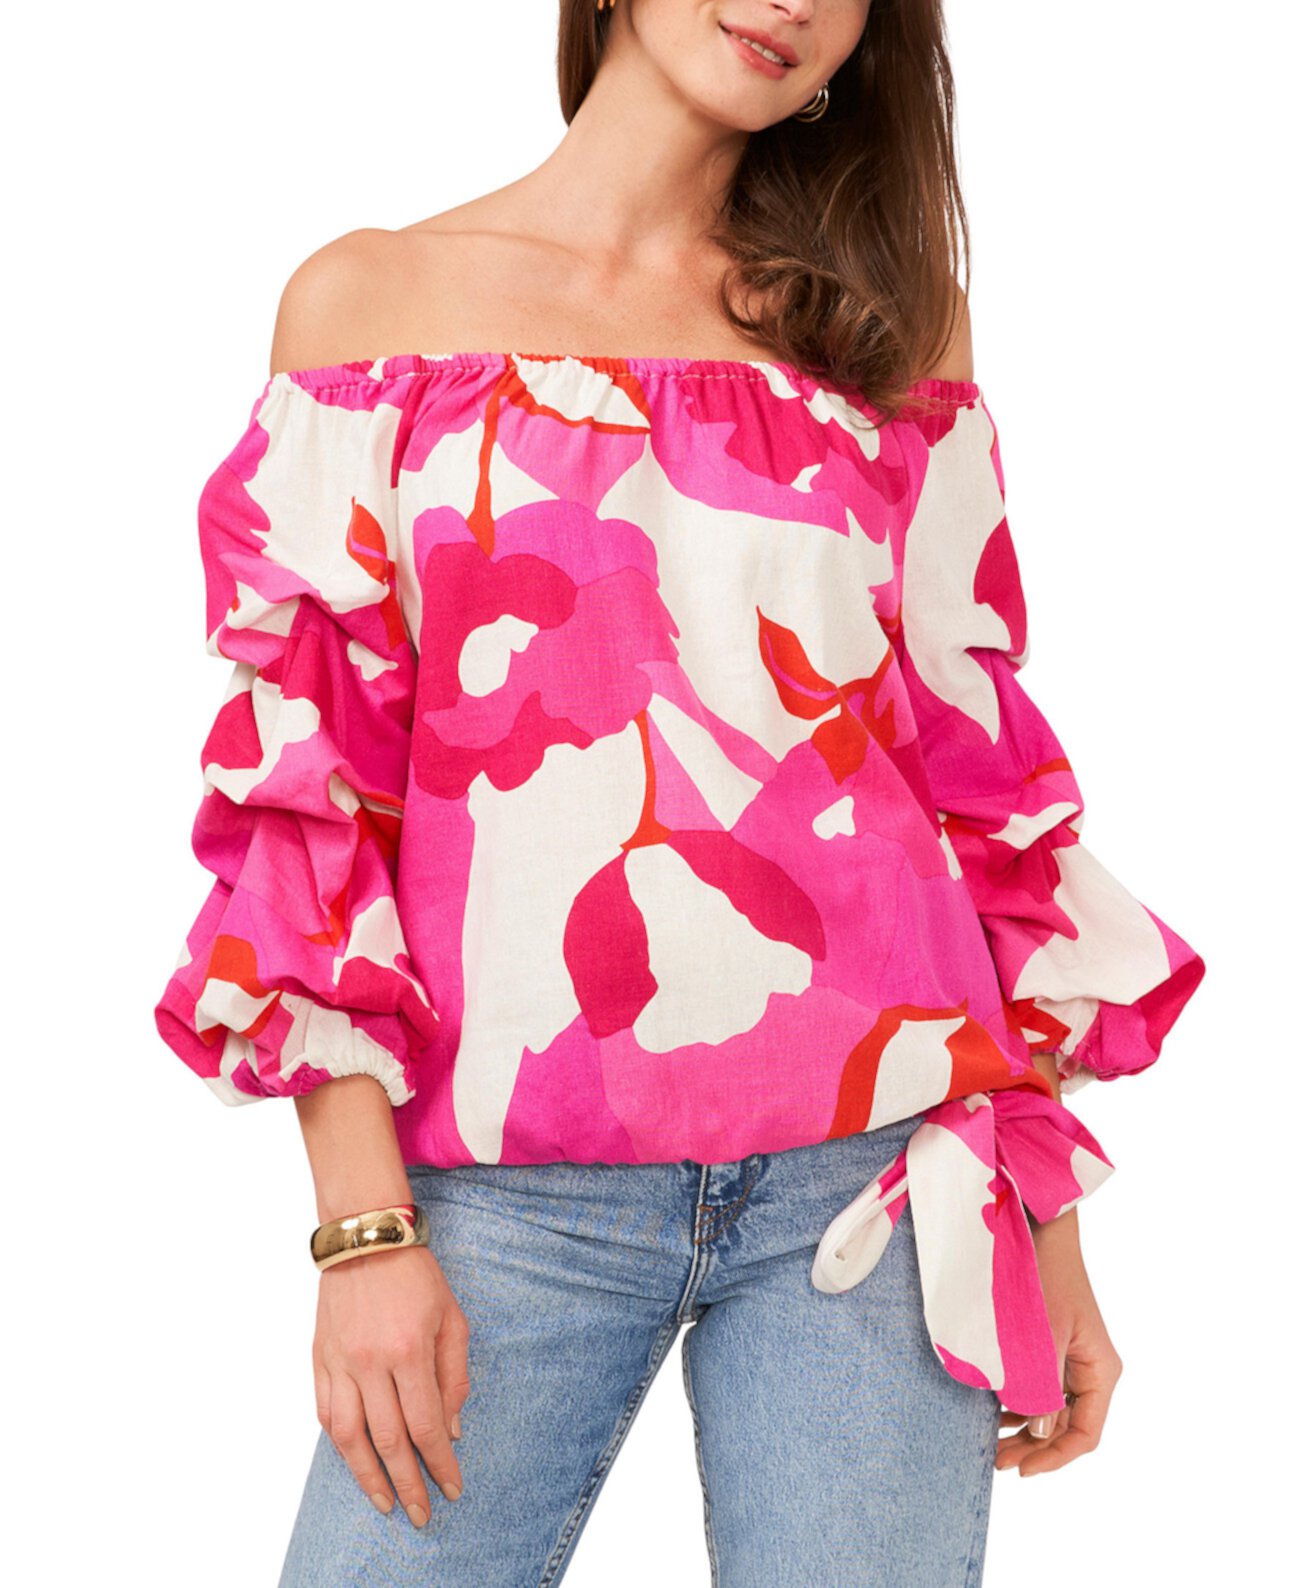 Women's Printed Off The Shoulder Bubble Sleeve Tie Front Blouse Vince Camuto